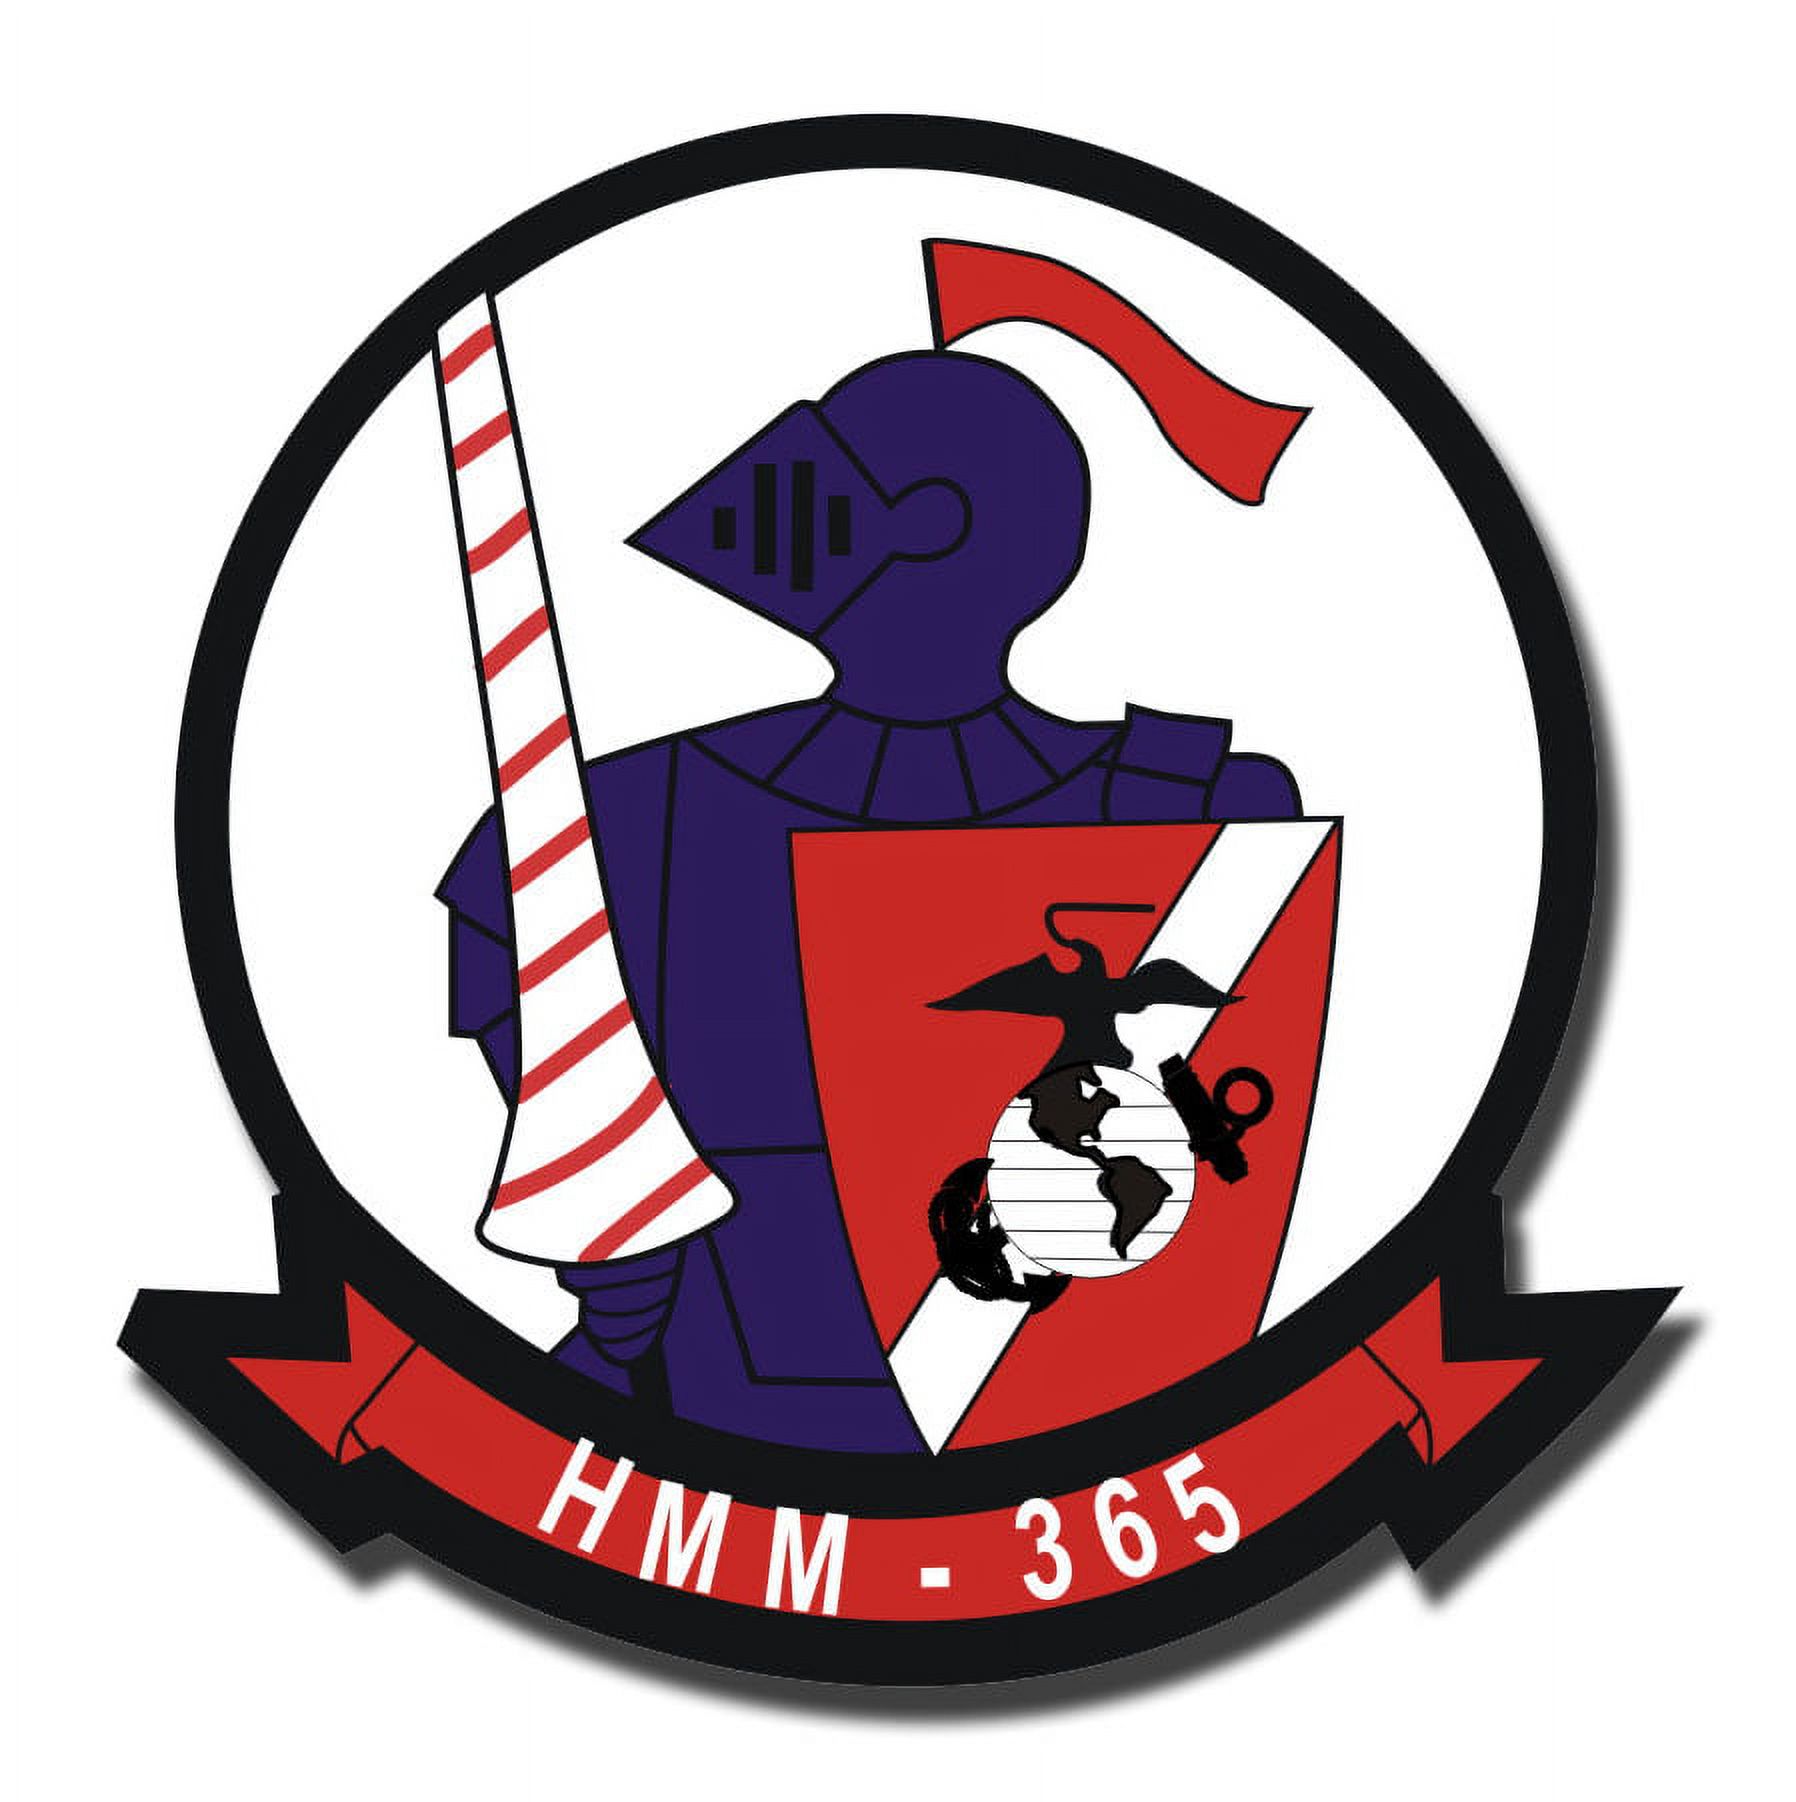 3.8 Inch 2nd Marine Division Marine Medium Tiltrotor Helicopter Squadron 365 Sticker - image 1 of 1